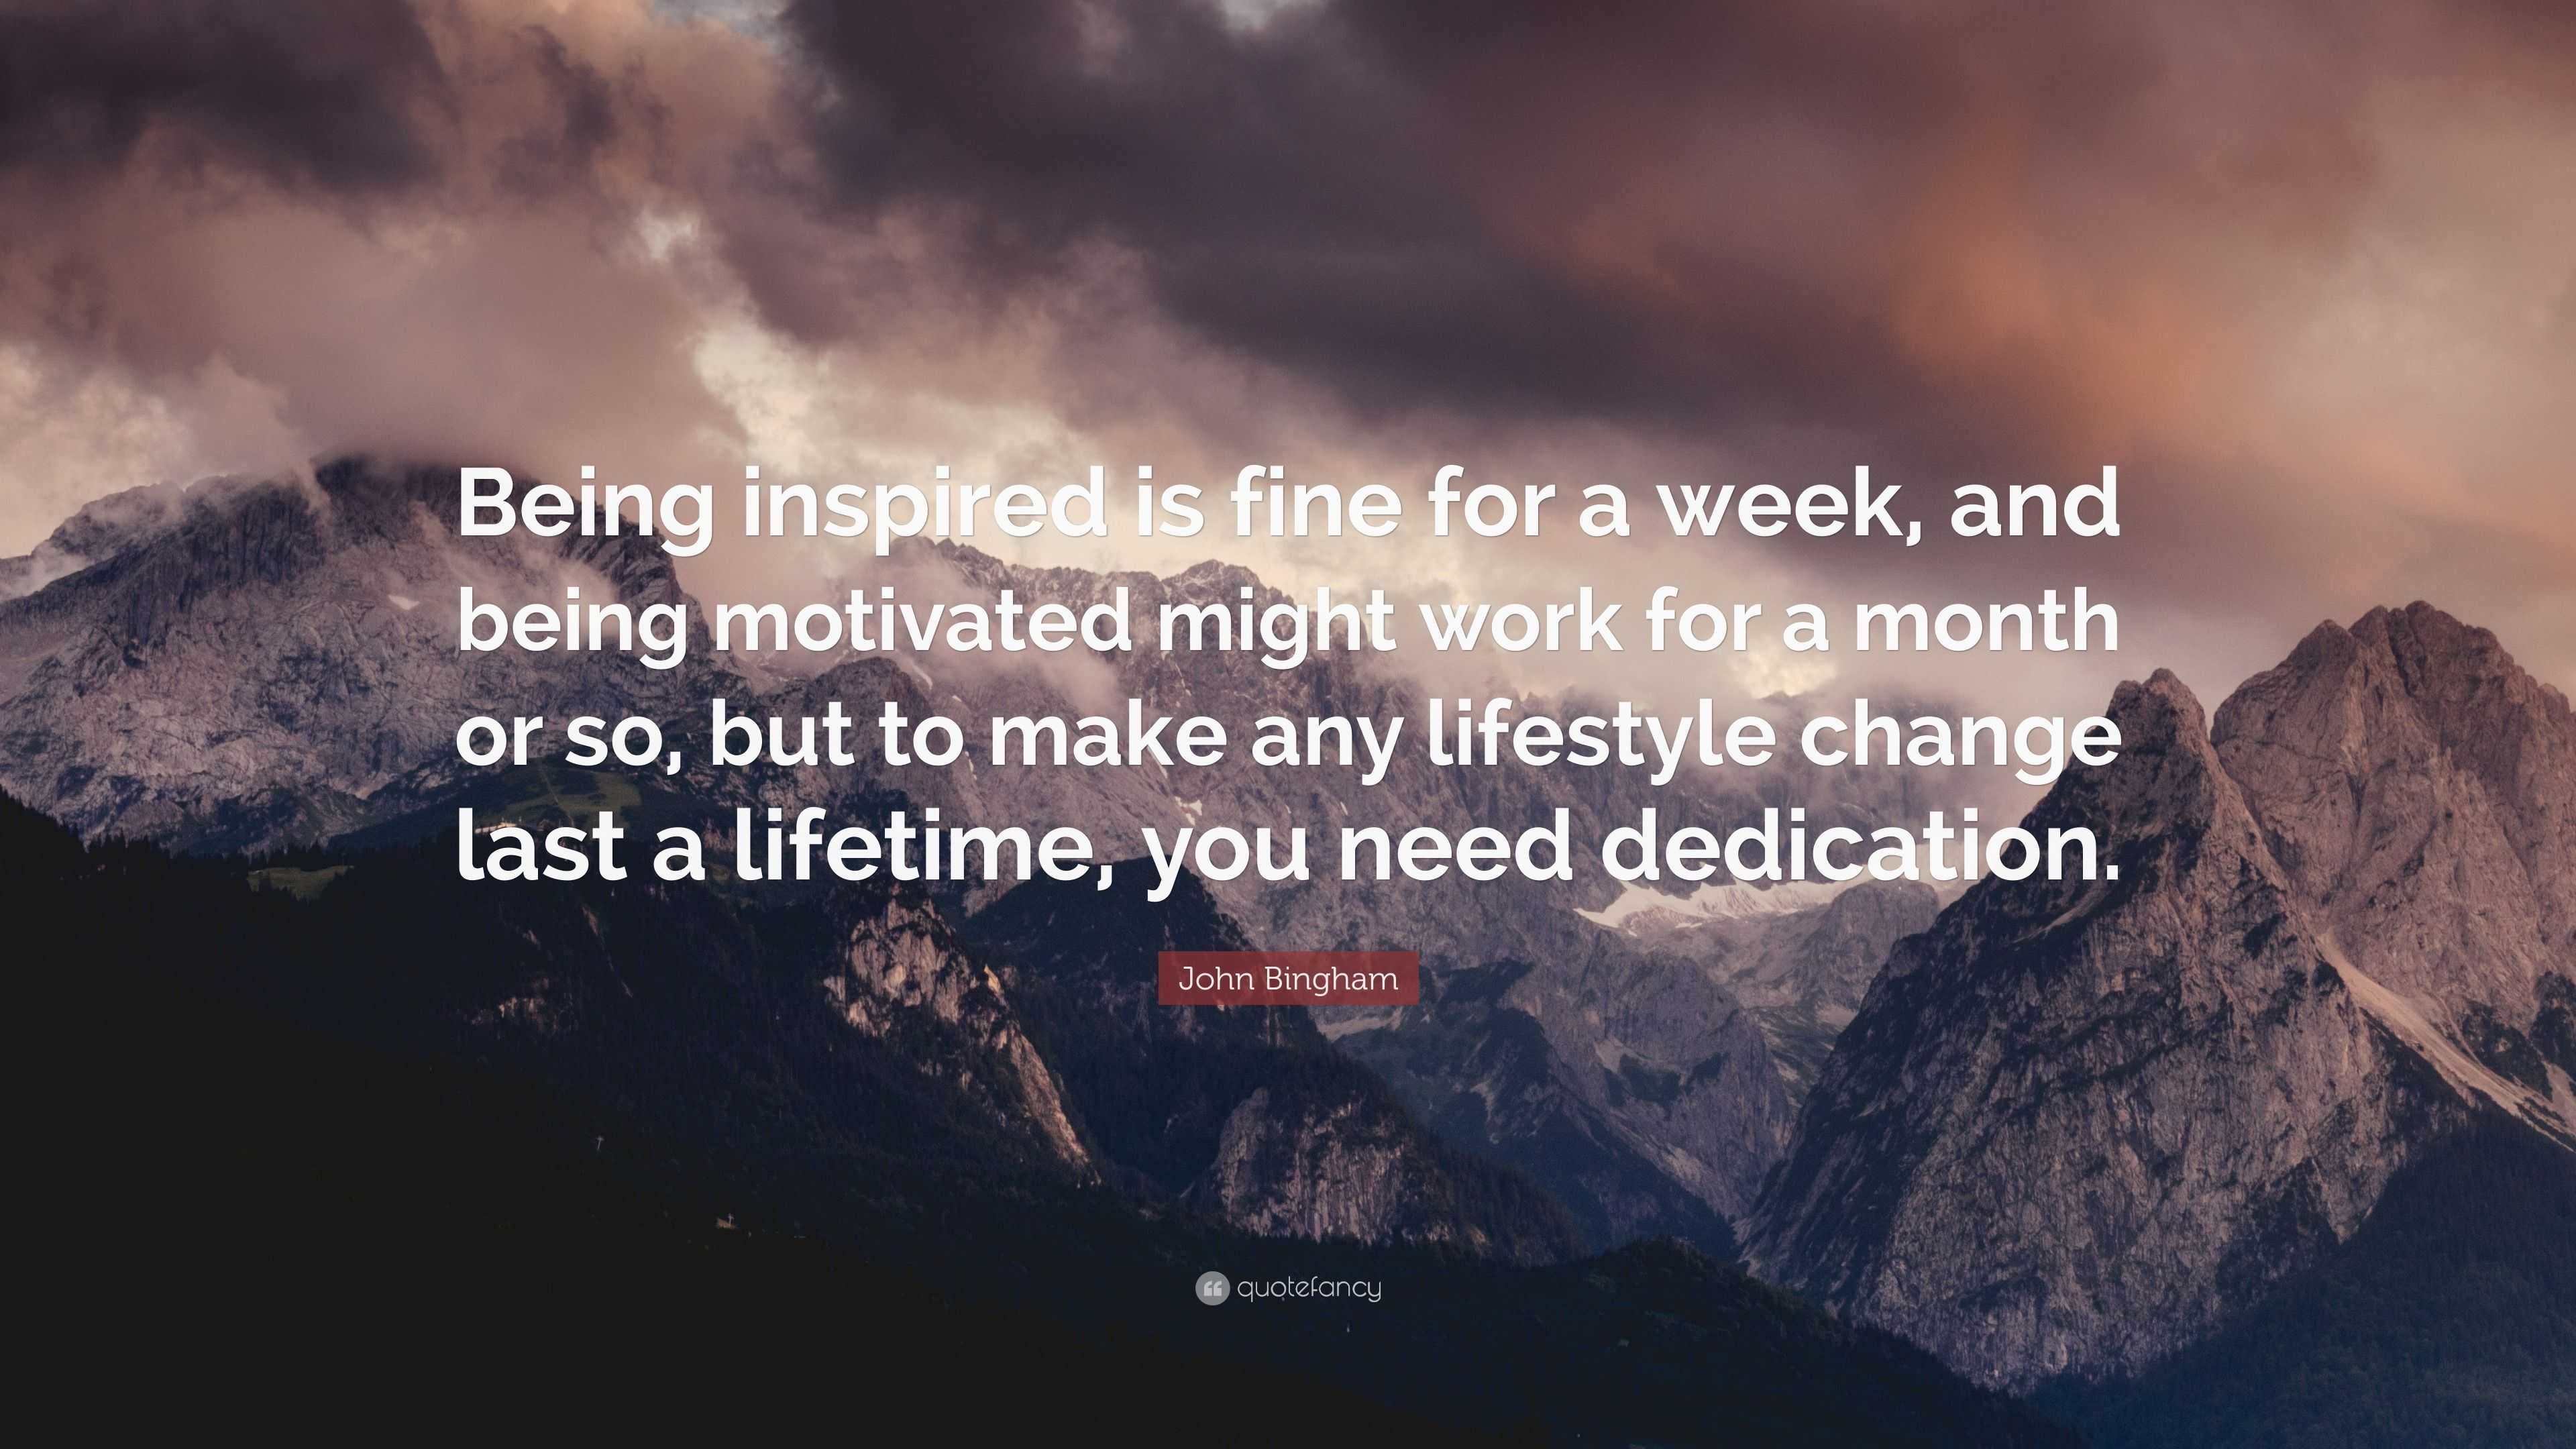 John Bingham Quote: “Being inspired is fine for a week, and being ...